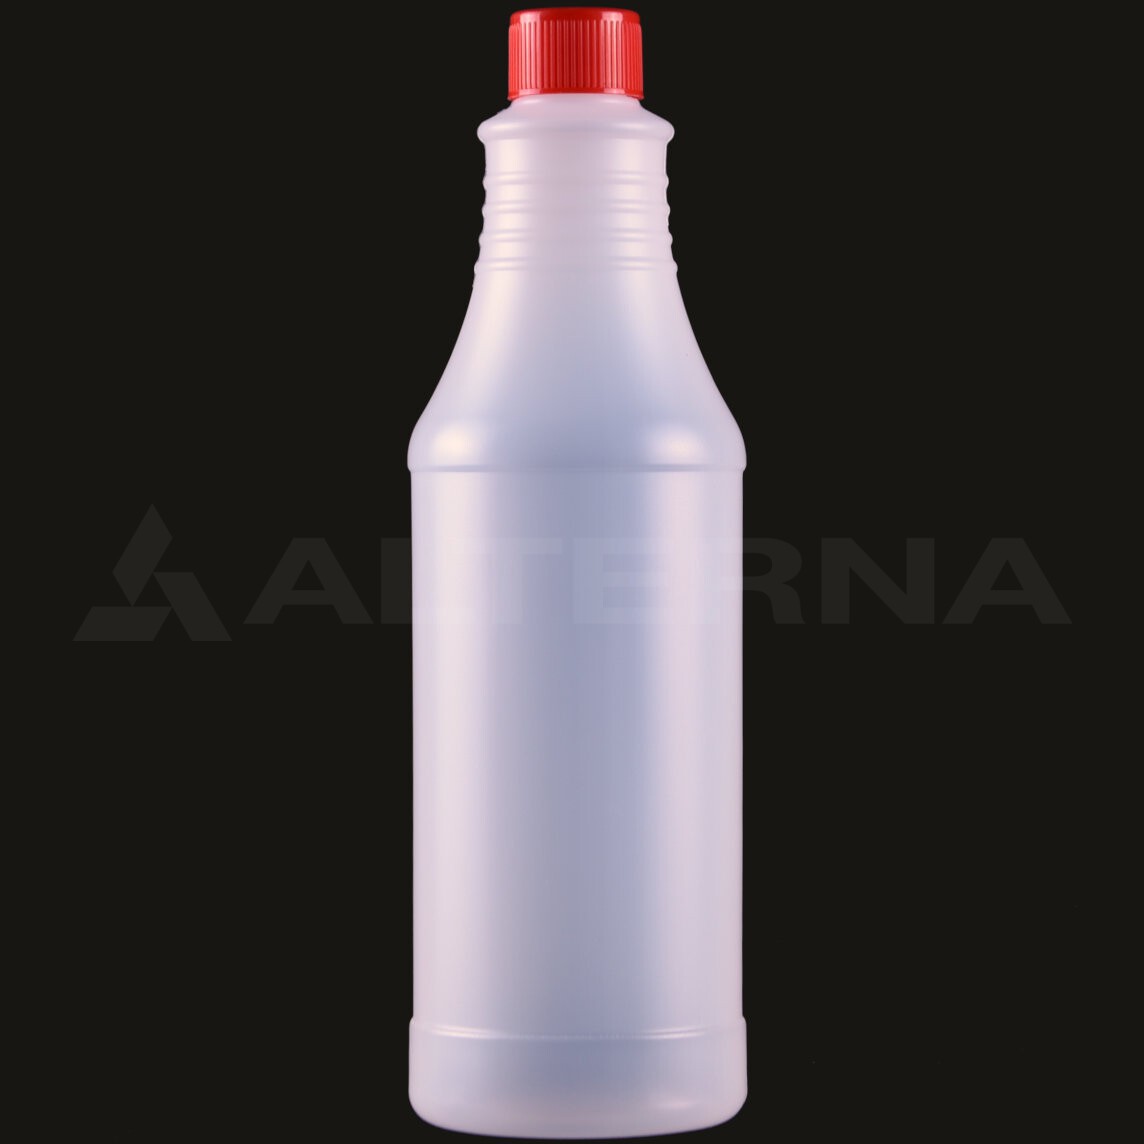 1000 ml HDPE Bottle with 28 mm Child-proof Cap